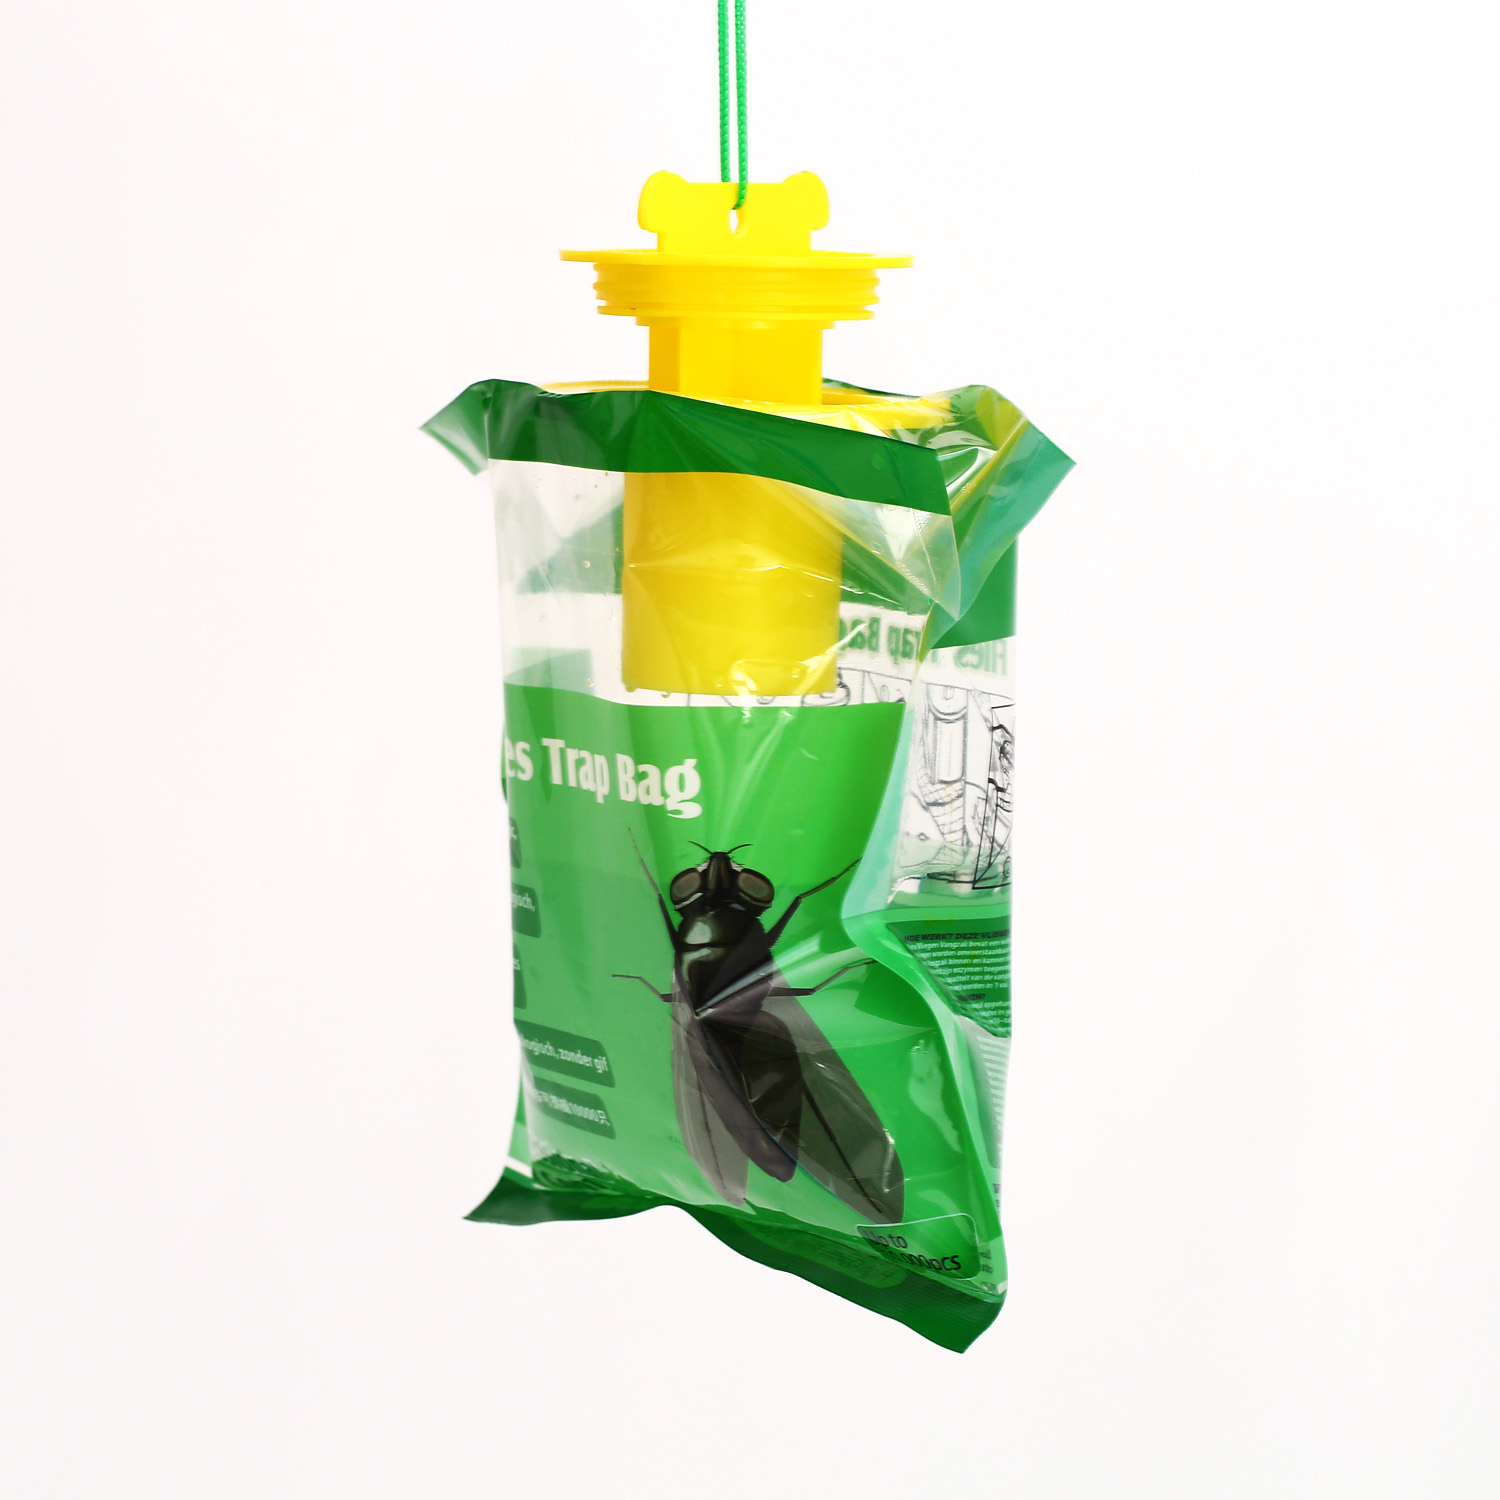 Haierc Outdoor Very Effective Hanging Fly Catcher Bag Disposable Fly Insects Trap Bags